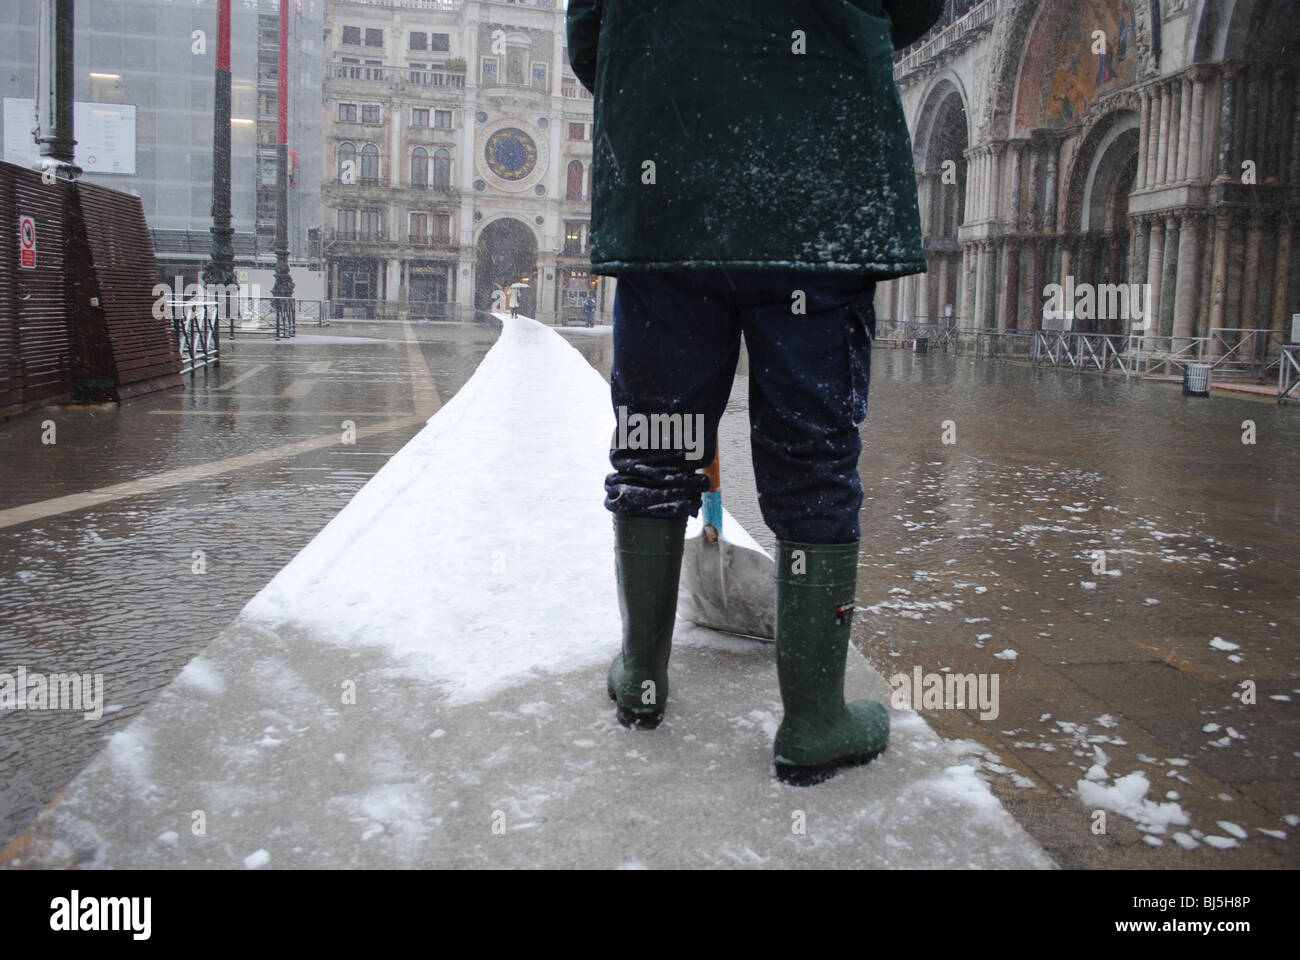 A man clears snow from walkways in a flooded St Mark's Square, Venice, Italy Stock Photo